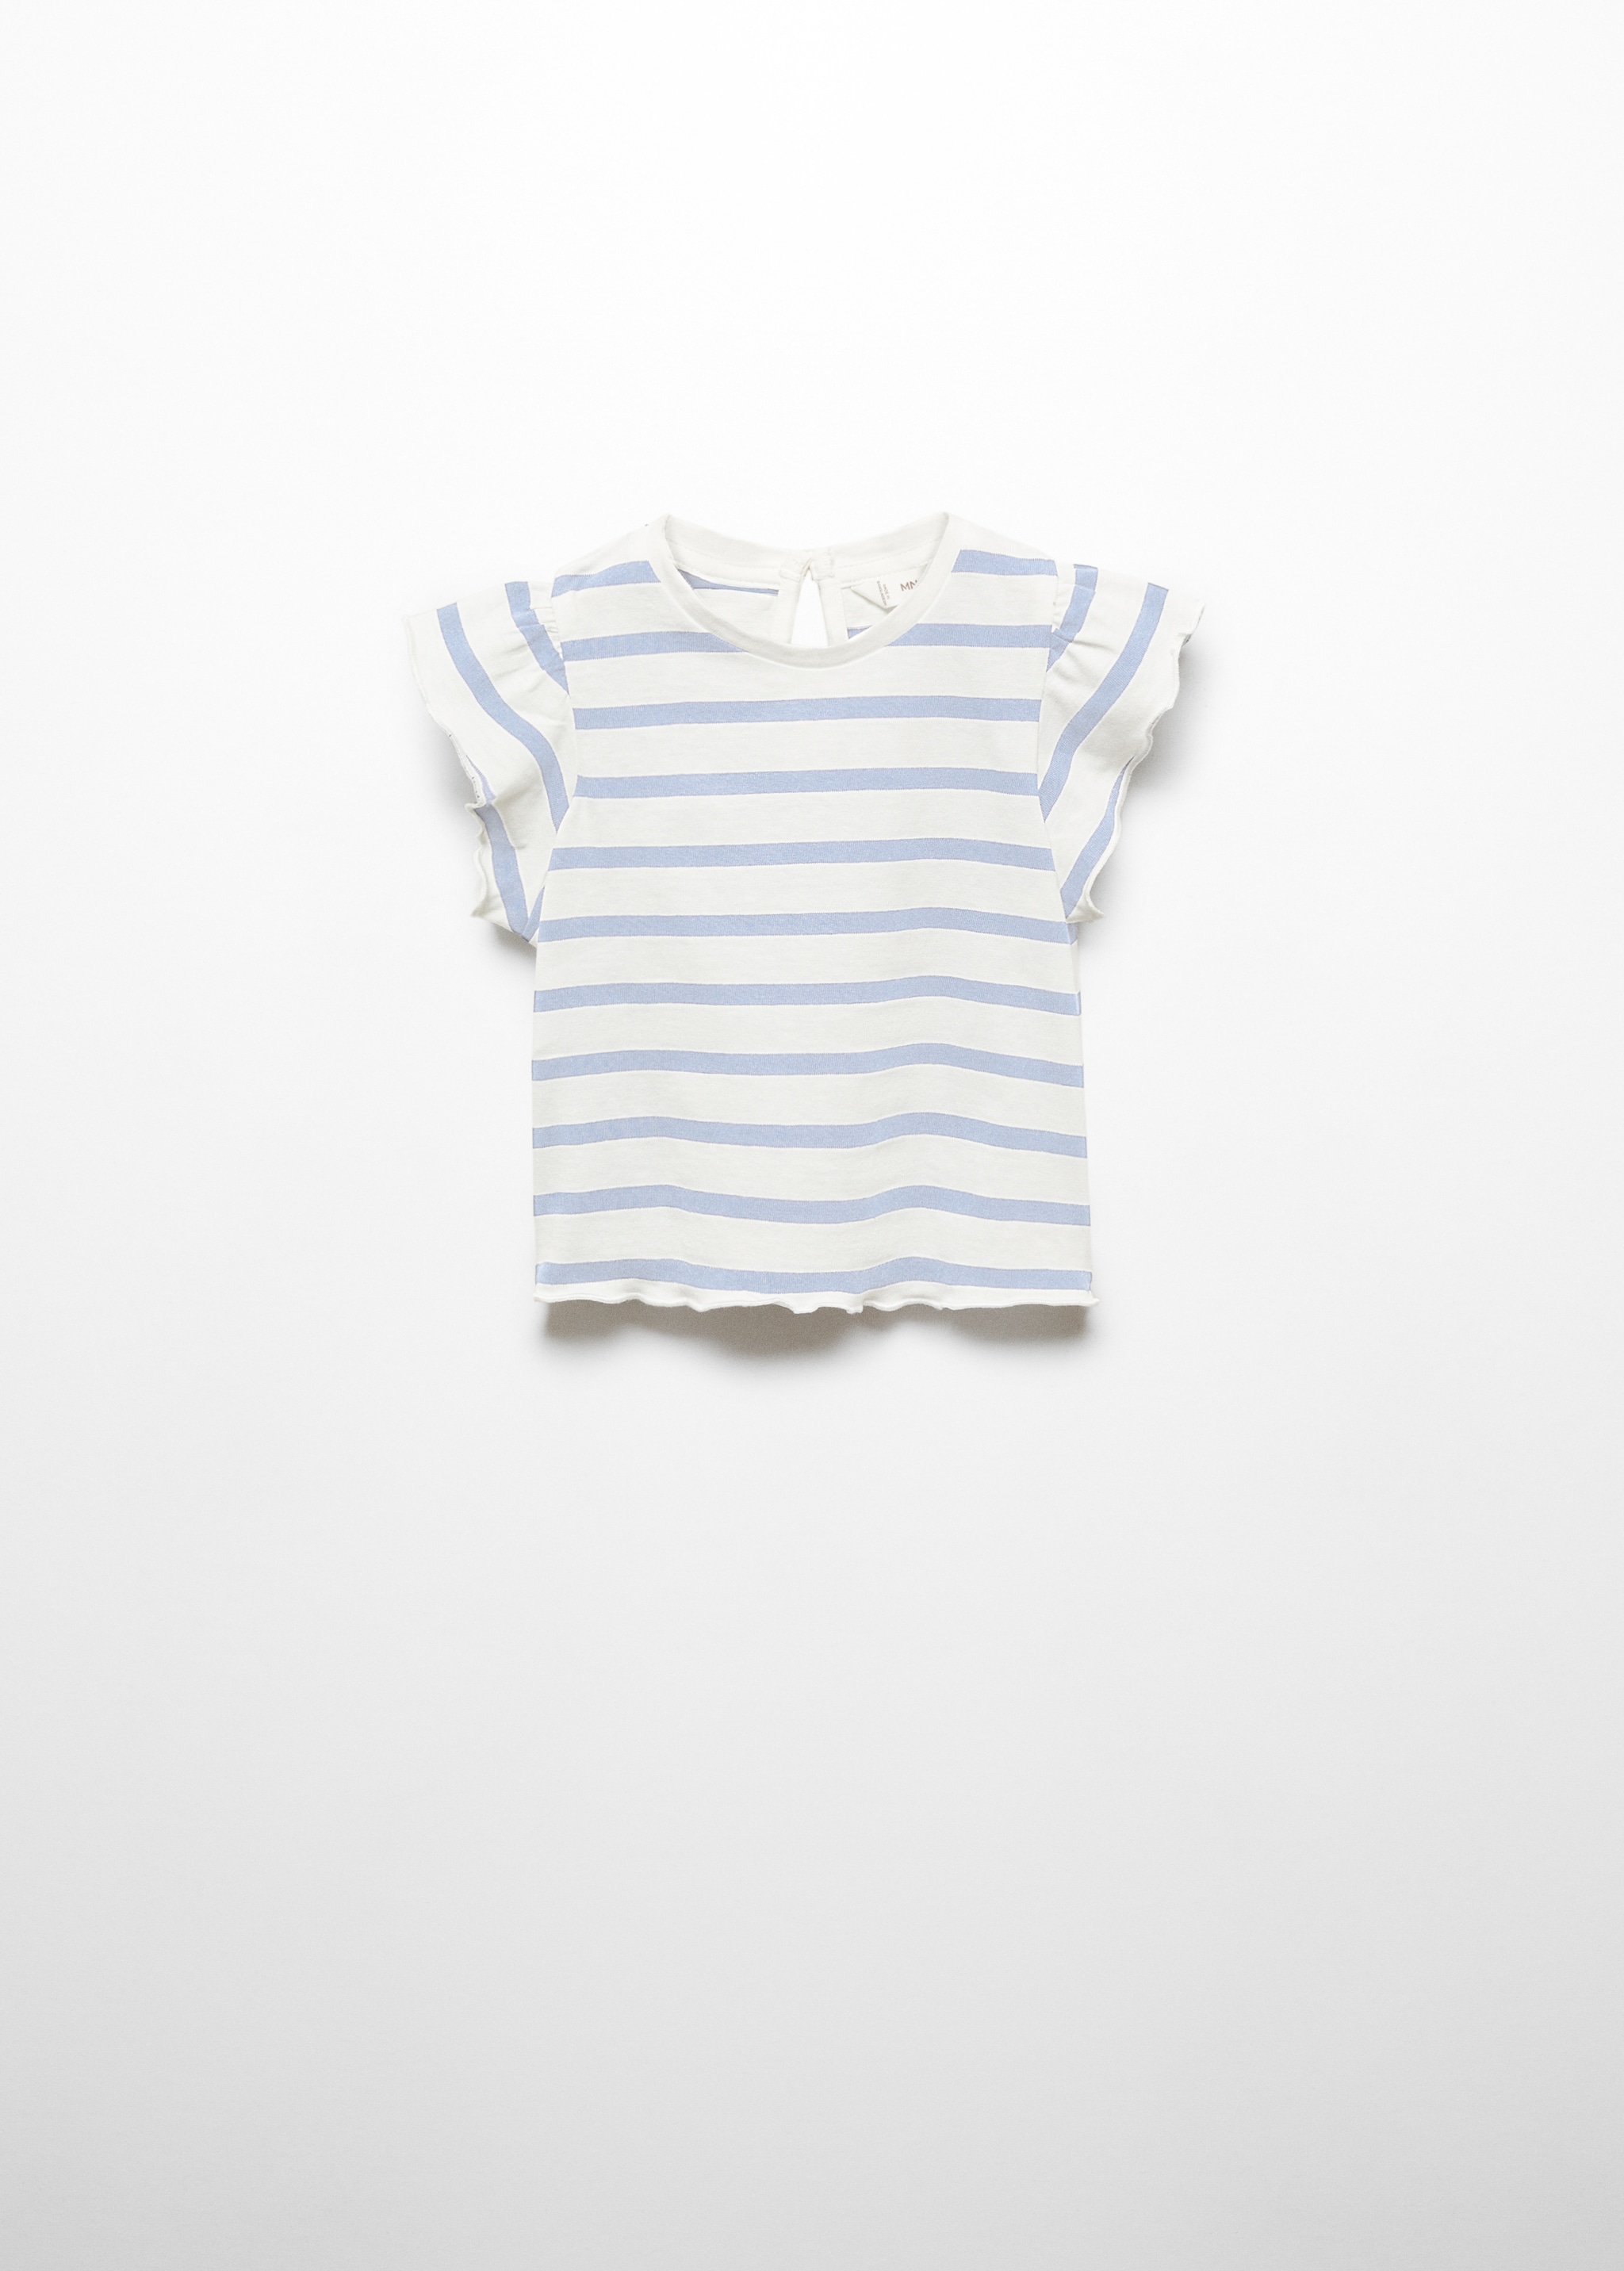 Ruffled striped t-shirt - Article without model